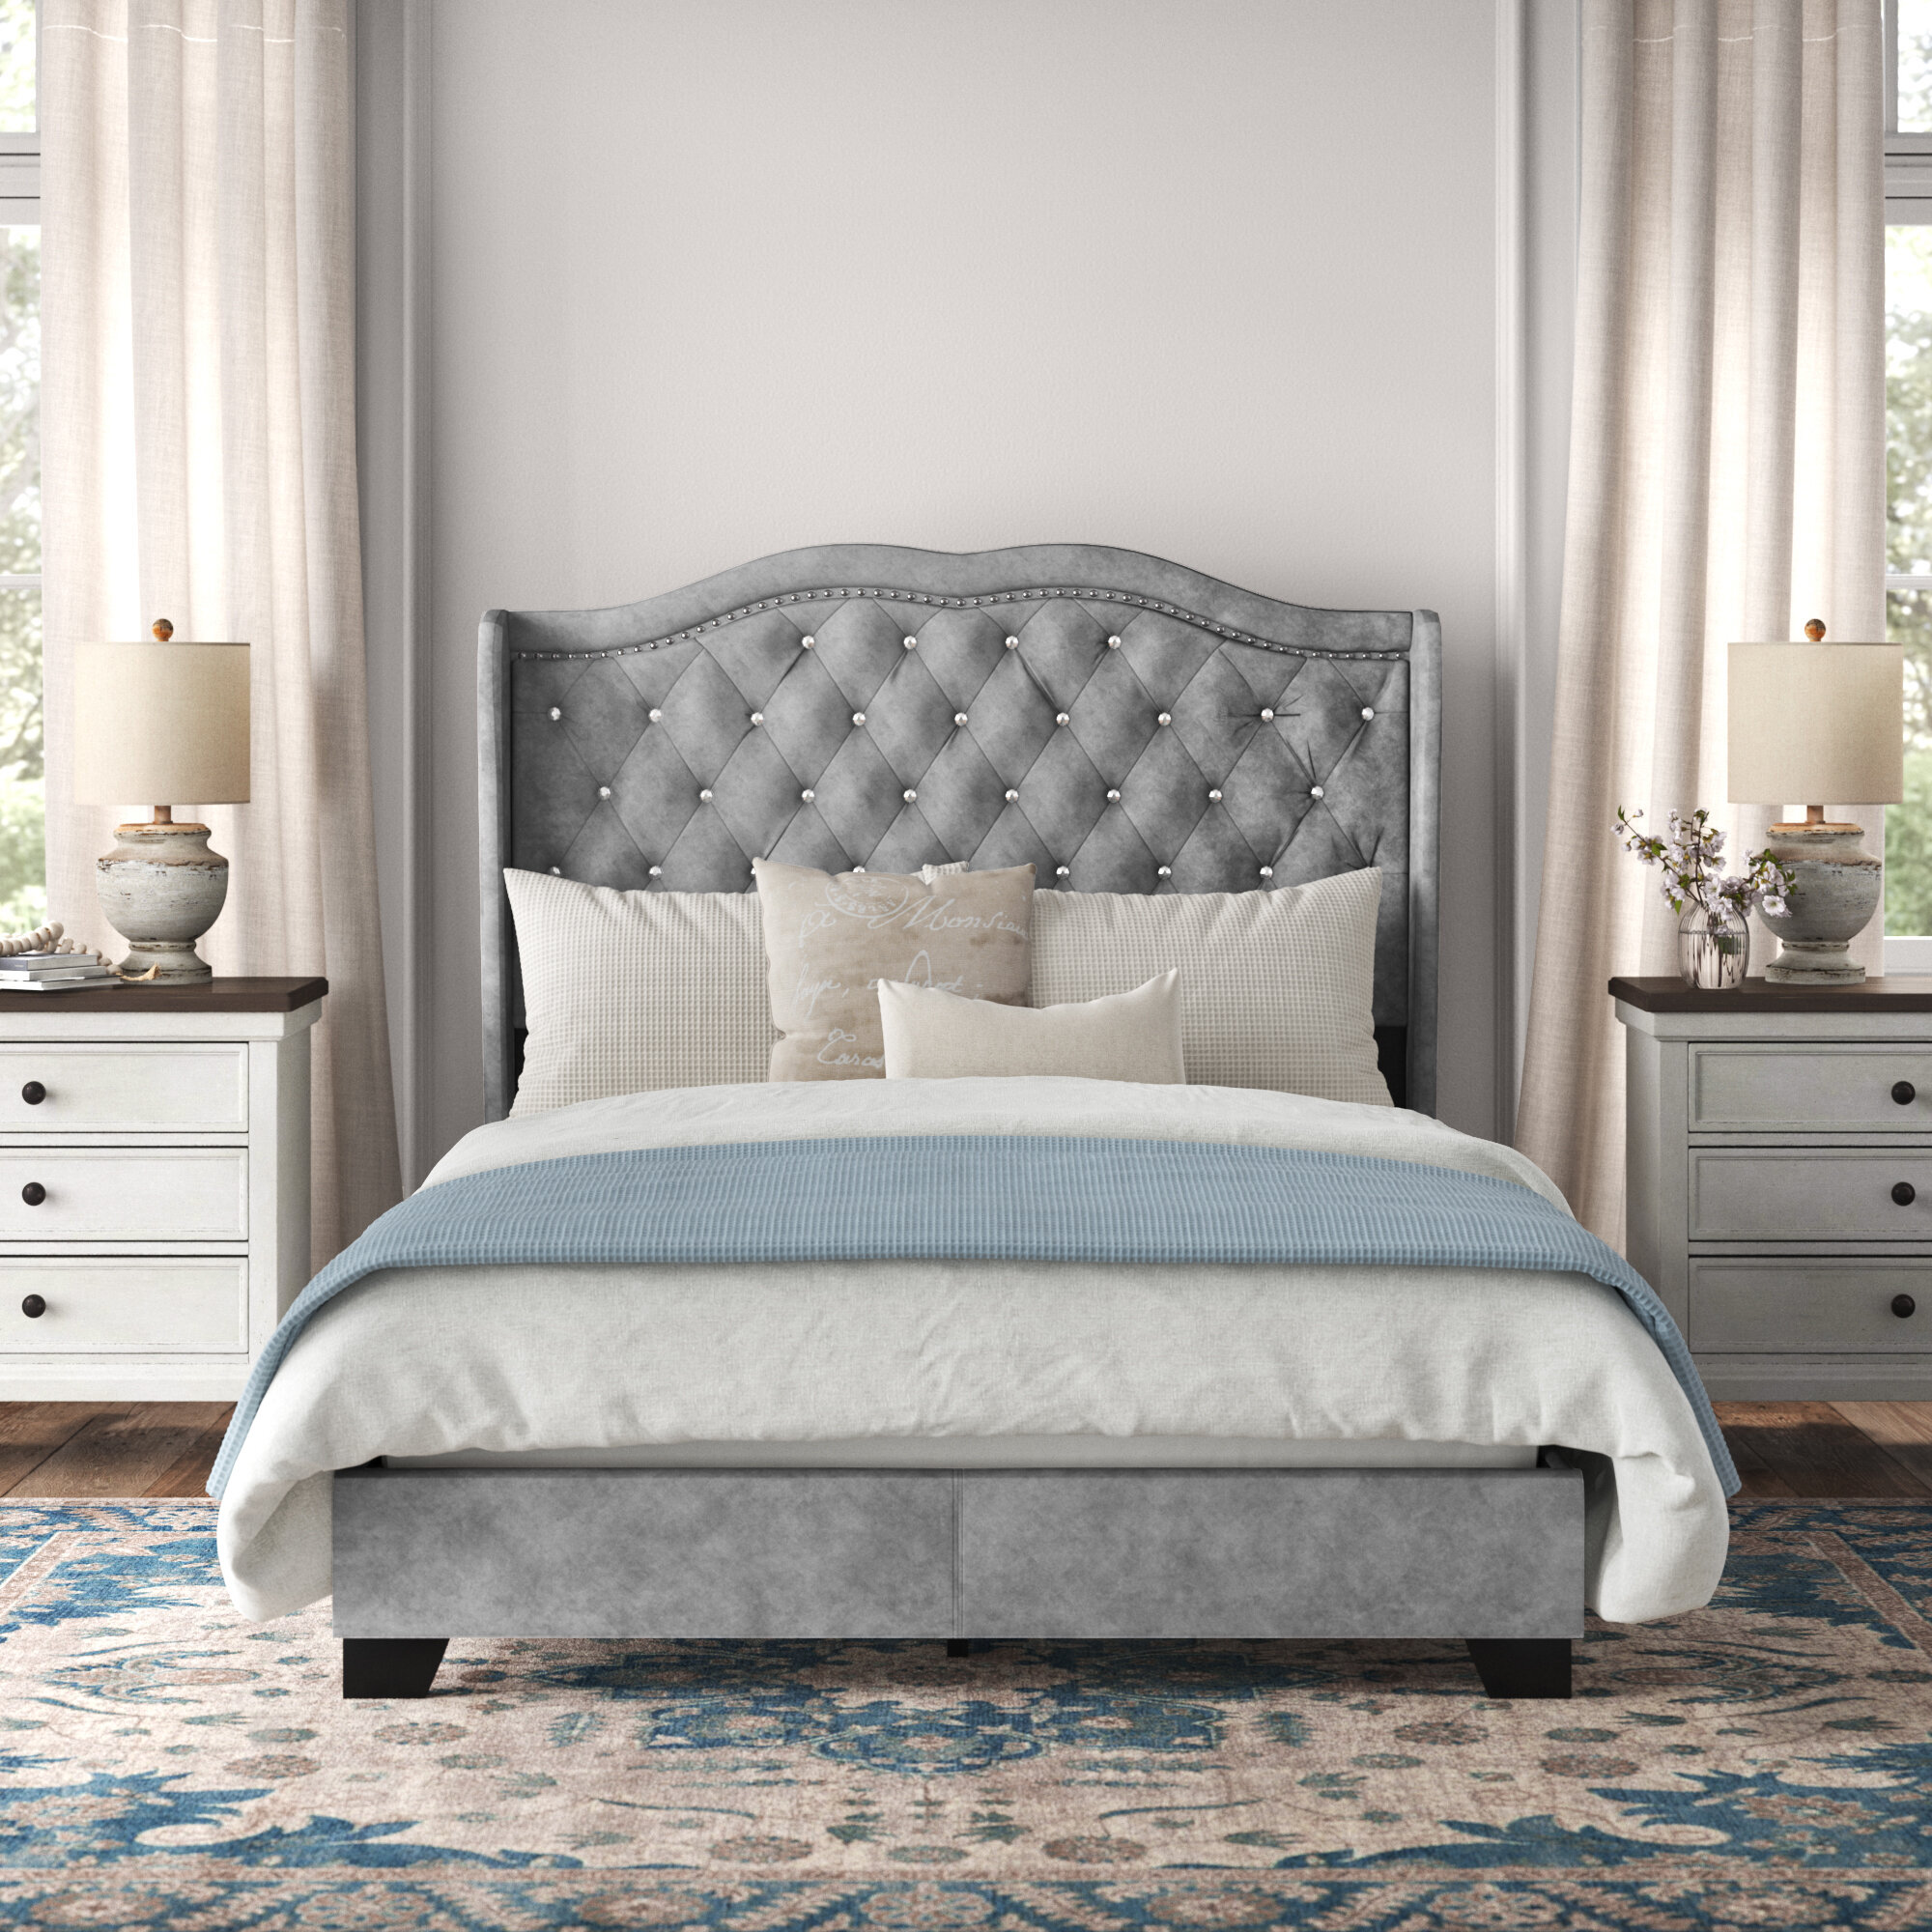 Tufted Headboard King Size Upholstered Bedroom Furniture Modern Gray Fabric New 